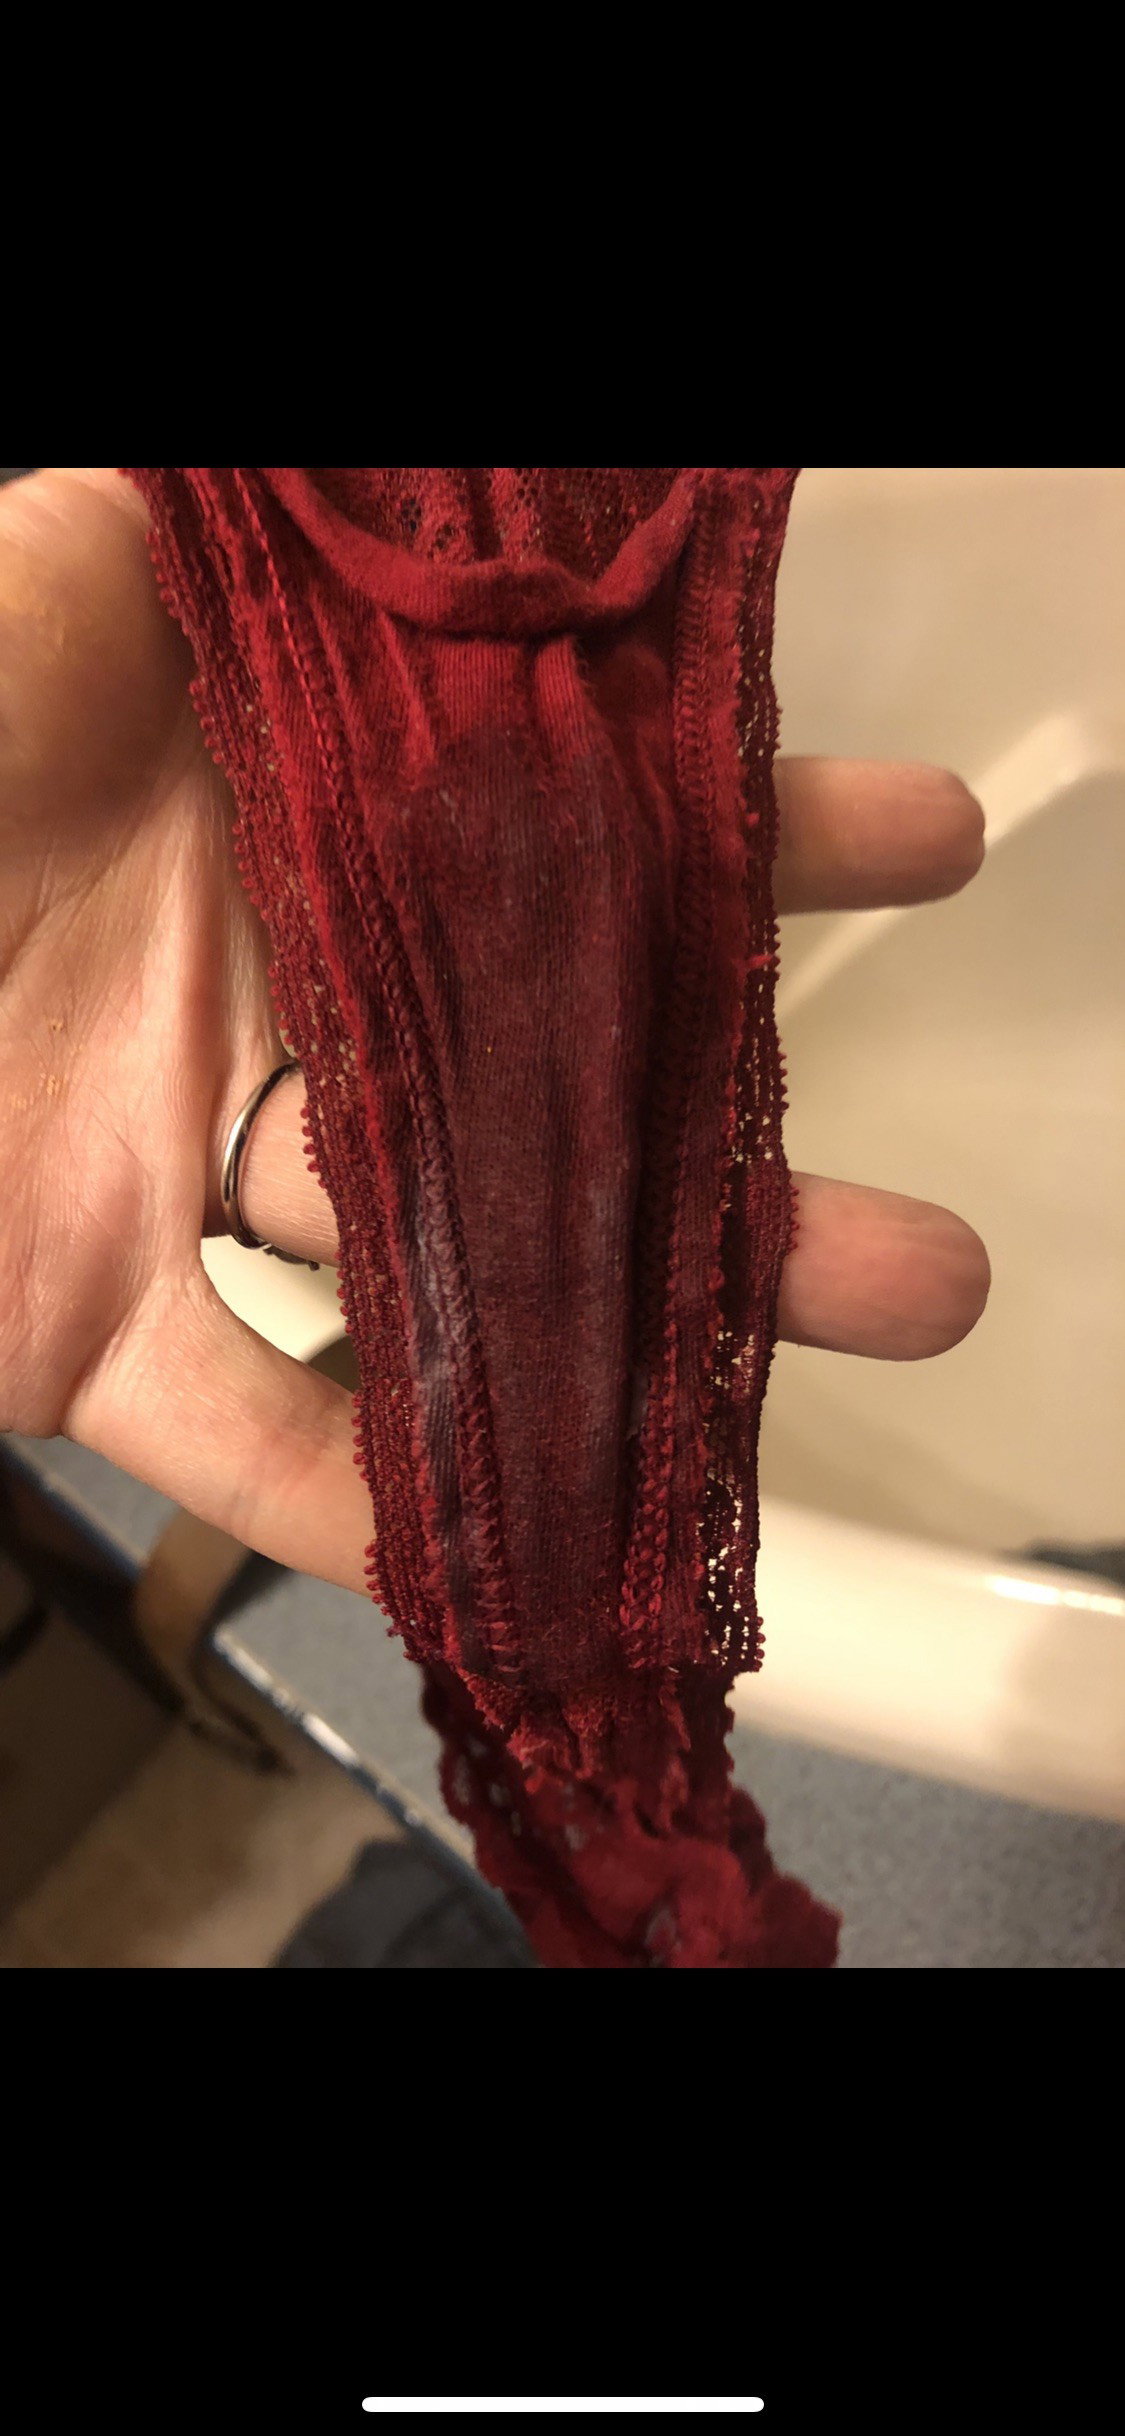 Photo by Domprincessboi2 with the username @Domprincessboi2,  November 16, 2020 at 4:03 PM. The post is about the topic Real Couples and the text says 'From what i received, it appears Mistress had a great weekend and may have found herself a new bull! 🔥 #realcouples #hotwife #sharemysexywife #cuckold #hotwifecuckold #fuckmywife'